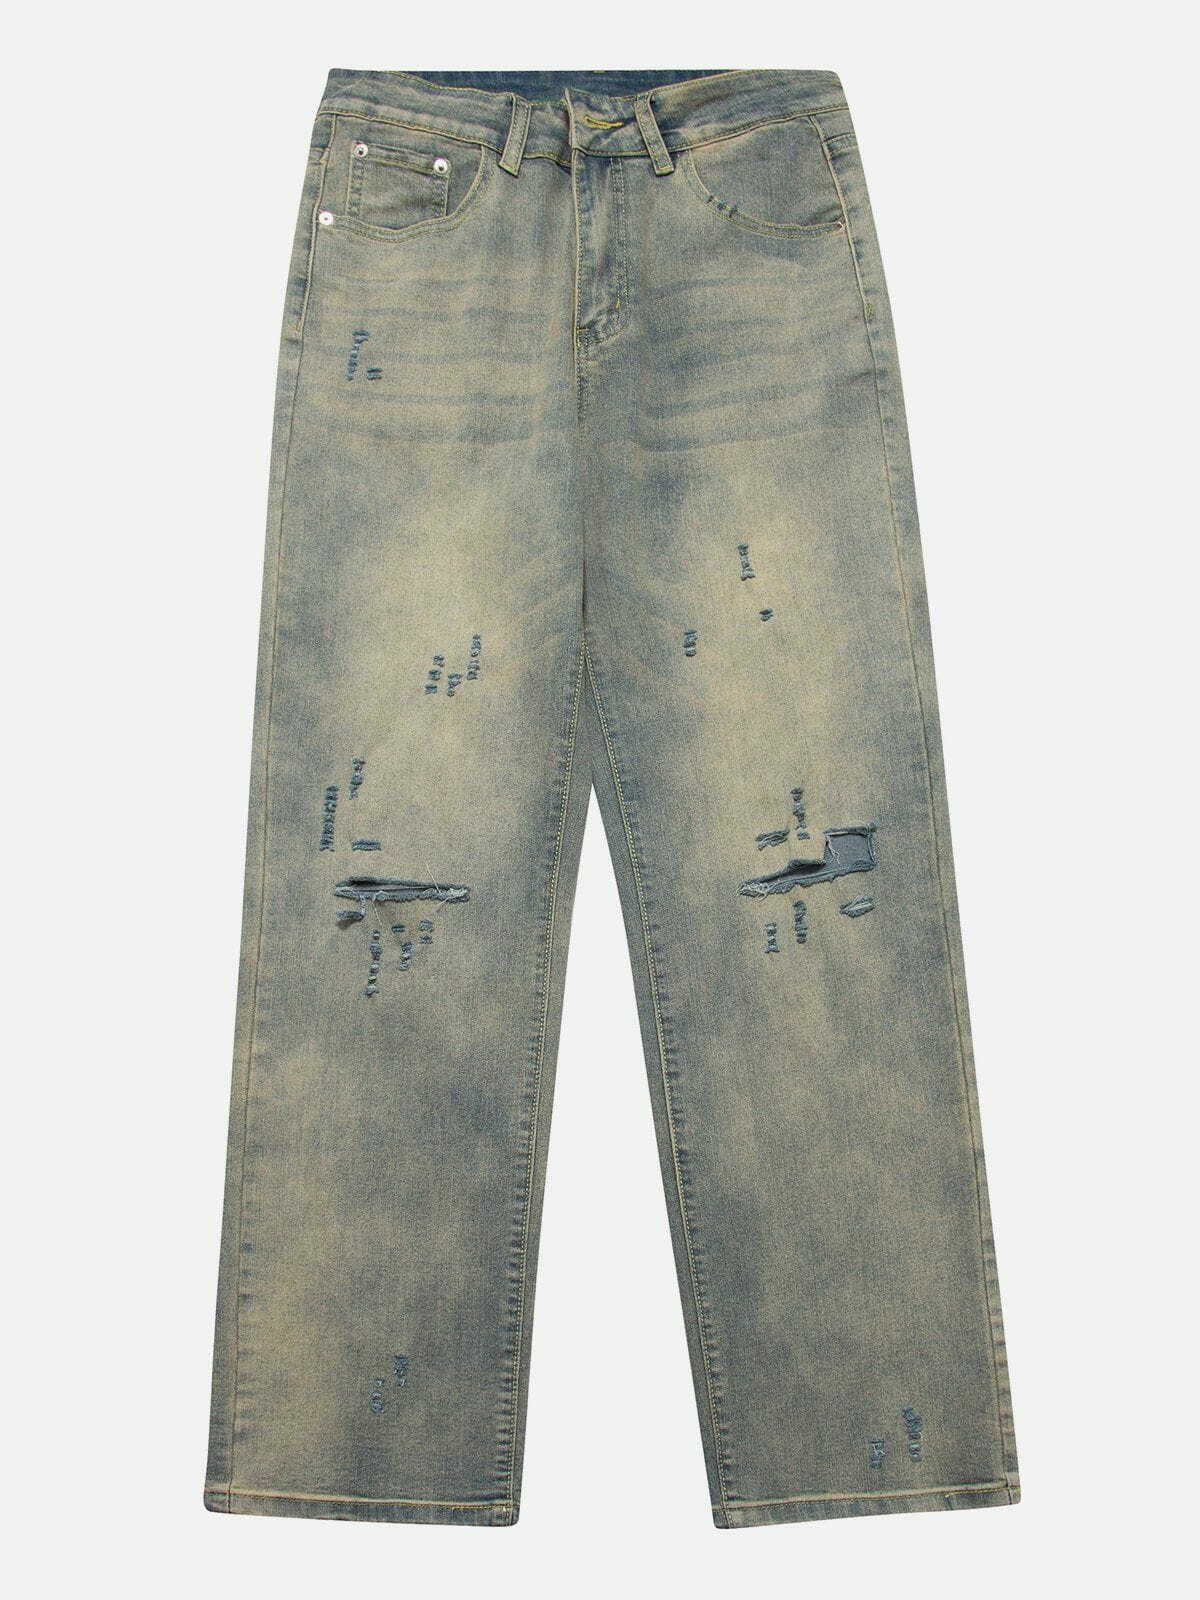 washed hole jeans edgy & retro streetwear 3870